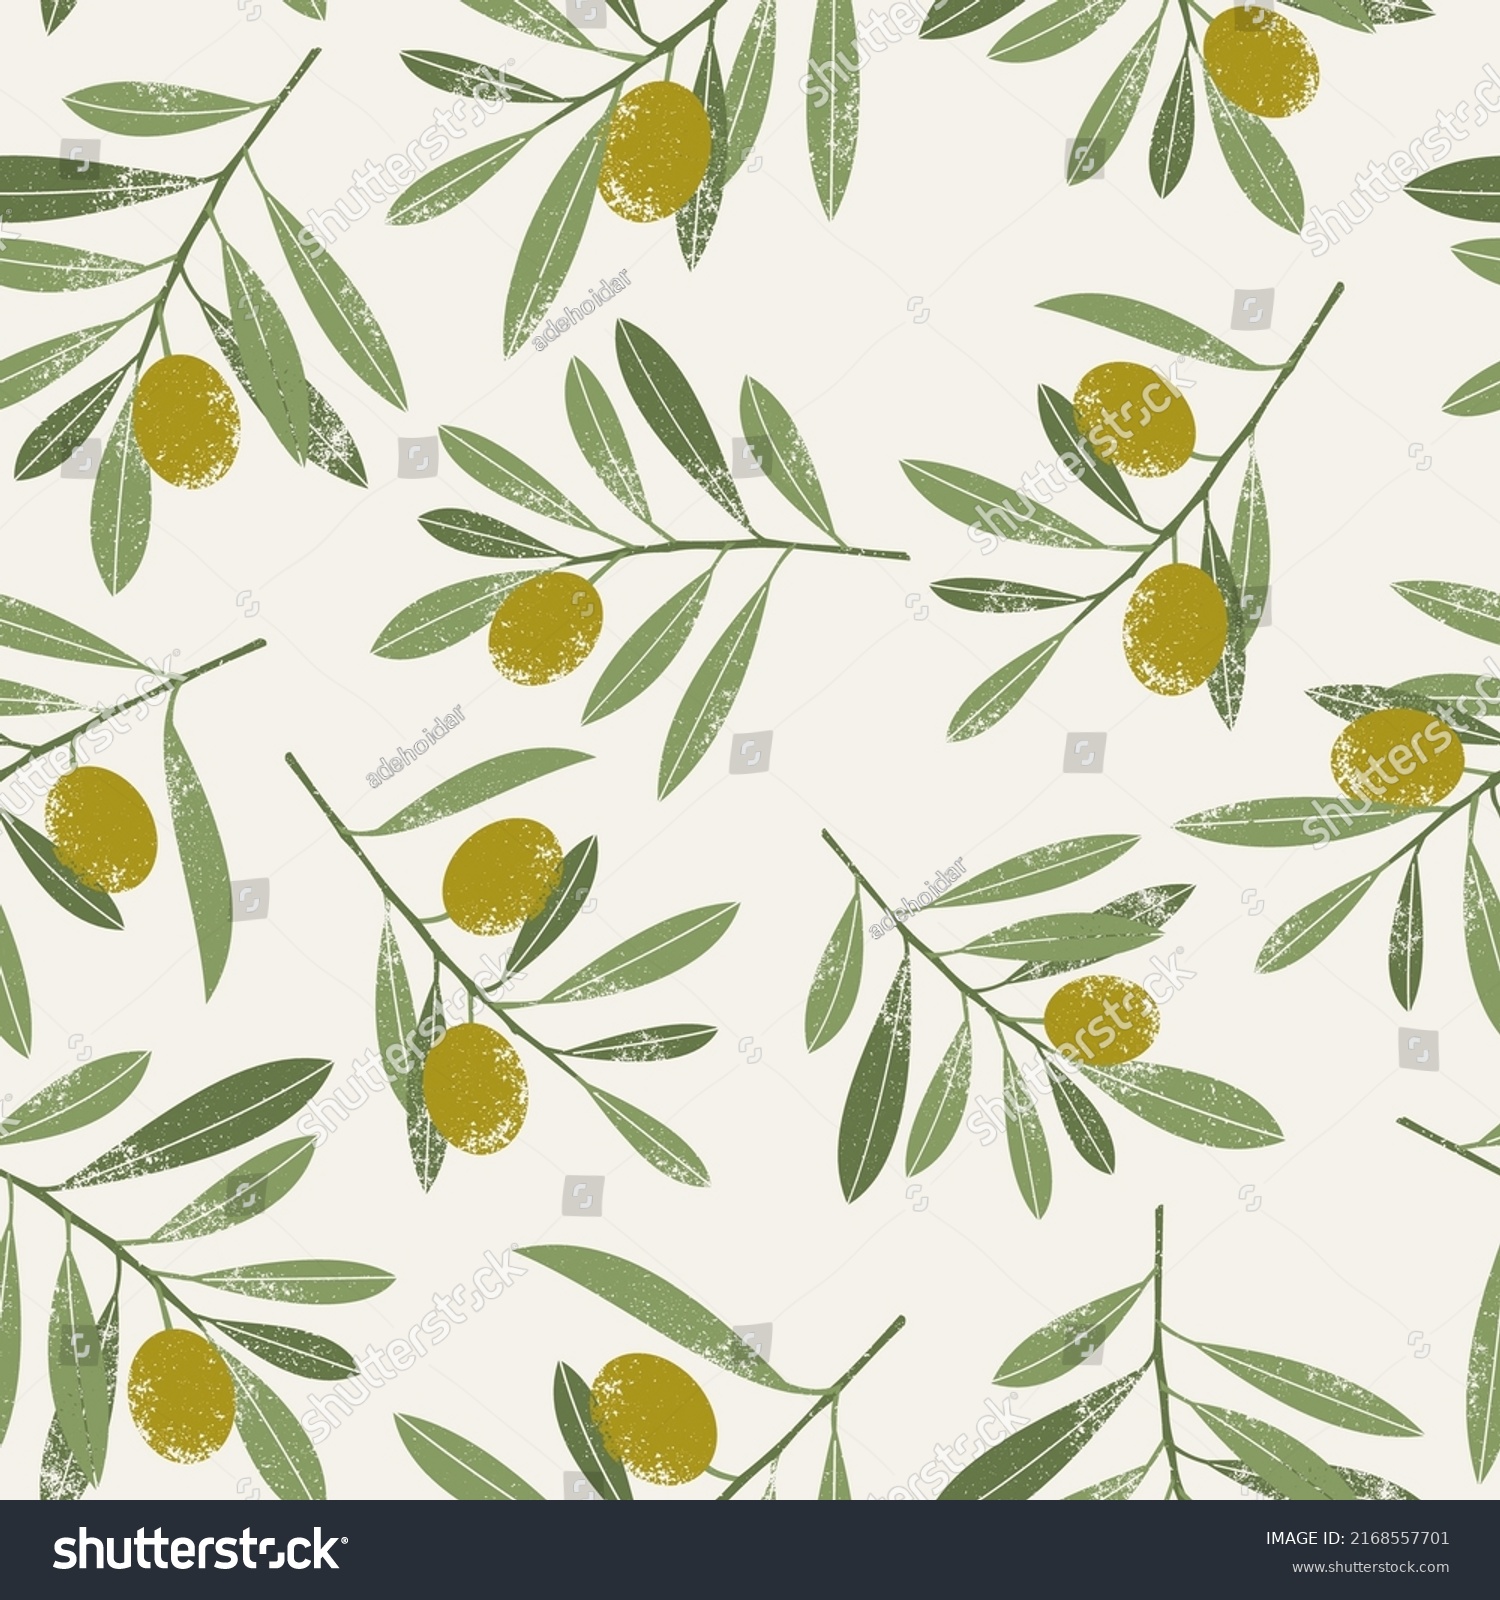 Olive Branches Leaves Seamless Pattern Olive Stock Vector Royalty Free 2168557701 Shutterstock 